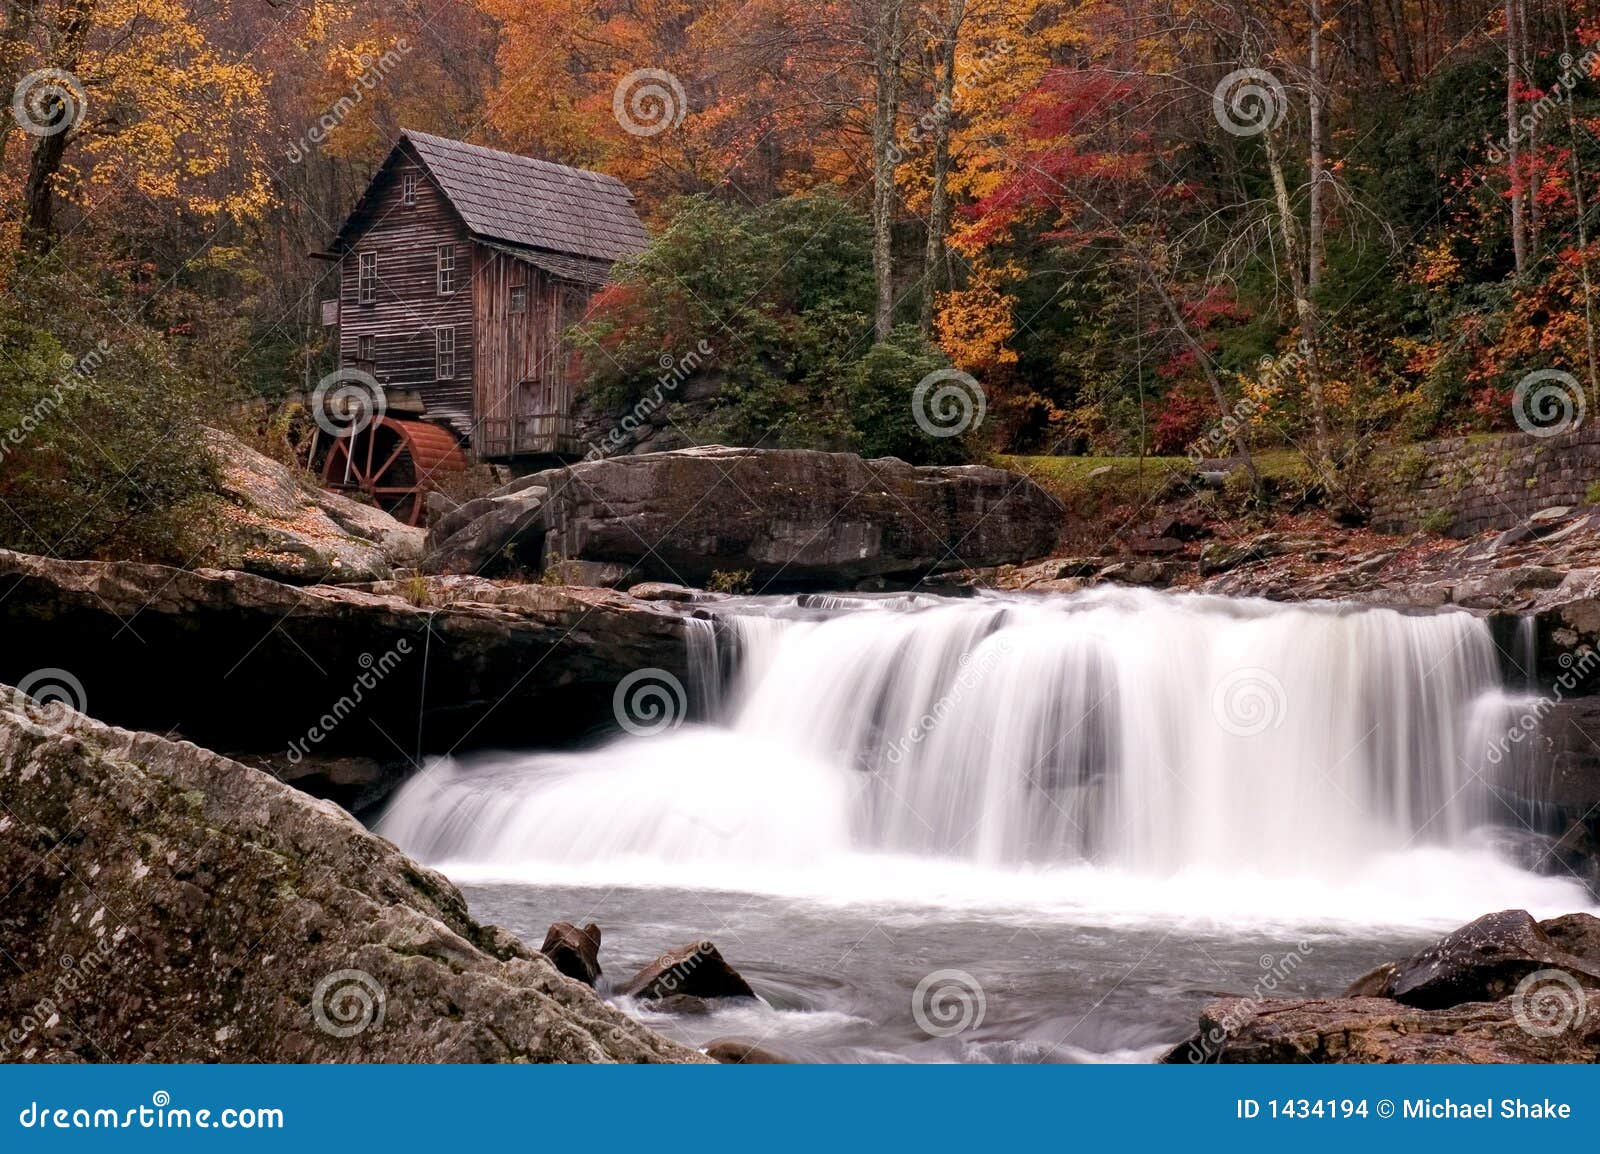 autumn at the grist mill